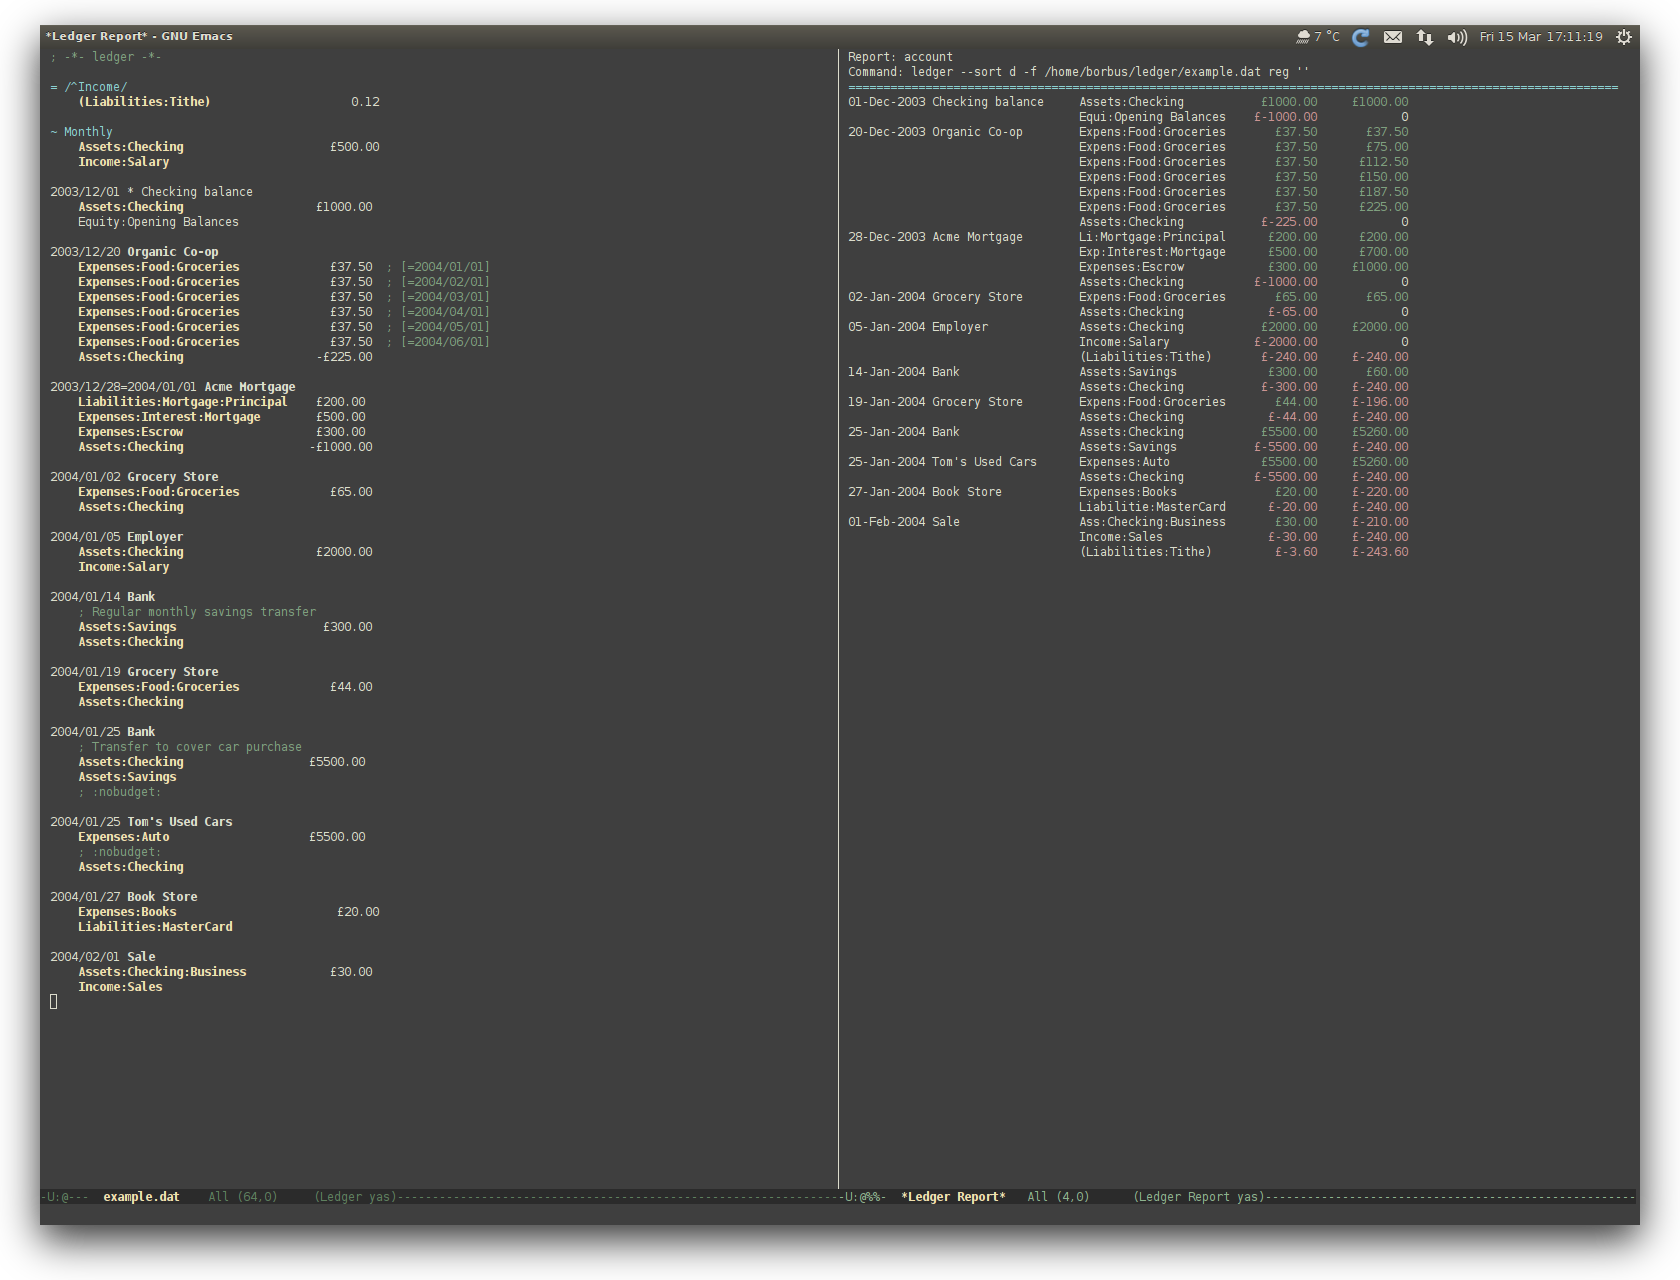 /TakeV/spacemacs/media/commit/c55c7c74a4a03974fc5a6ee96a48c40ec2304ba5/contrib/finance/img/ledger.png